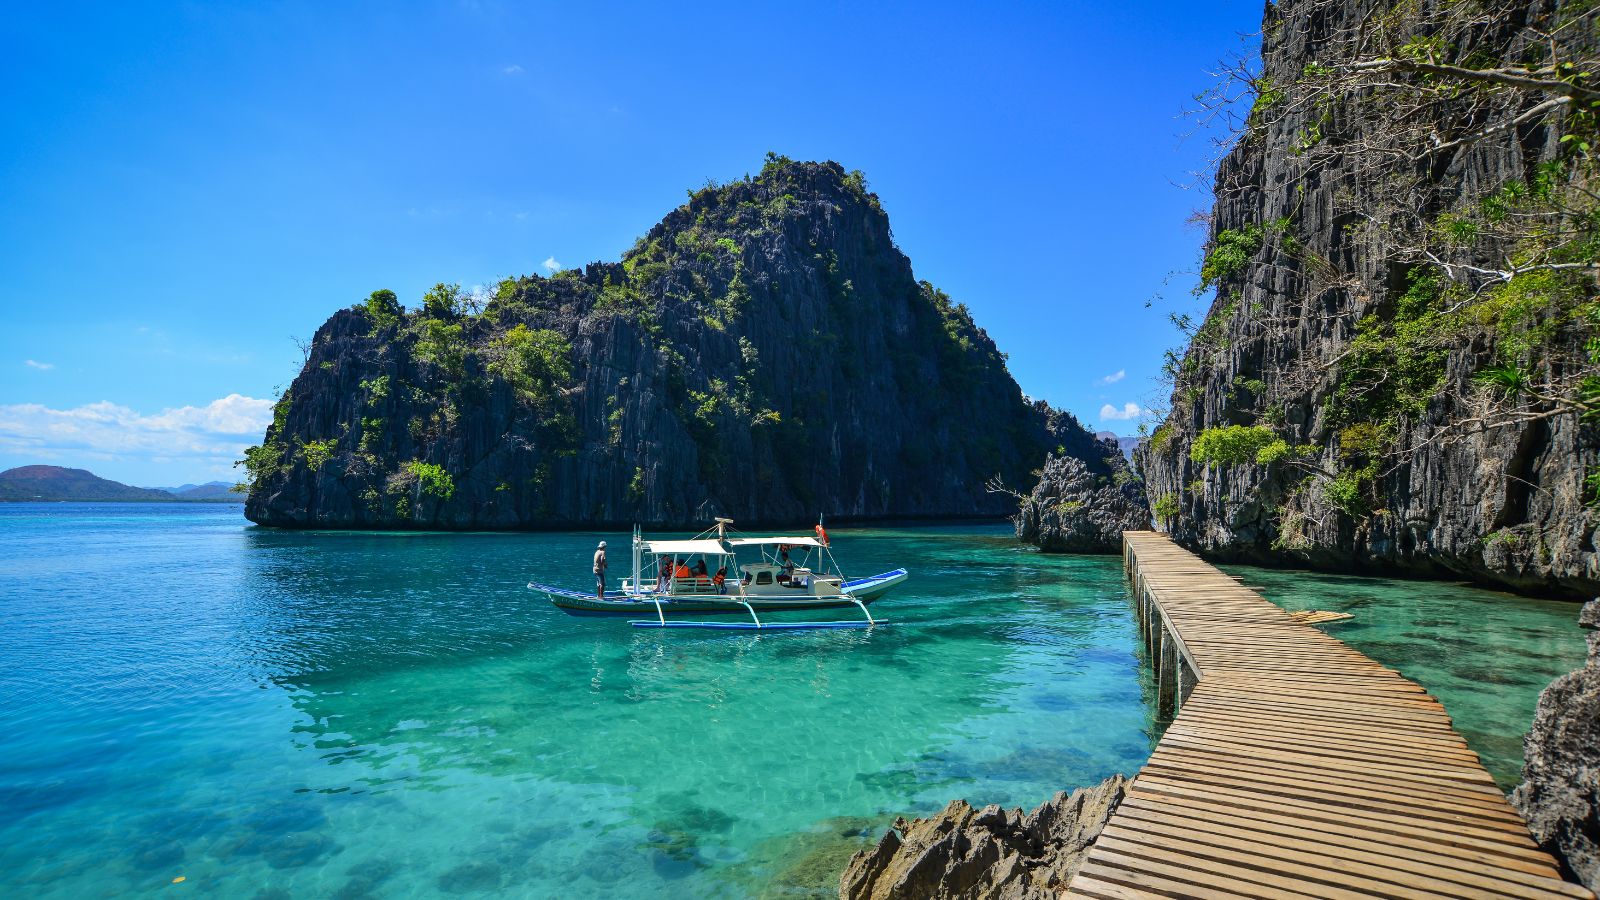 <p>Coron was known as a deserted island owing to its raw and majestic natural beauty, limestone formations, hidden lagoons, and pristine beaches. Today, this paradise has become touristy and commercial. Prices go through the roof, and decent food is hard to find. Travelers looking for budget travel or food expeditions should consider other destinations.</p>